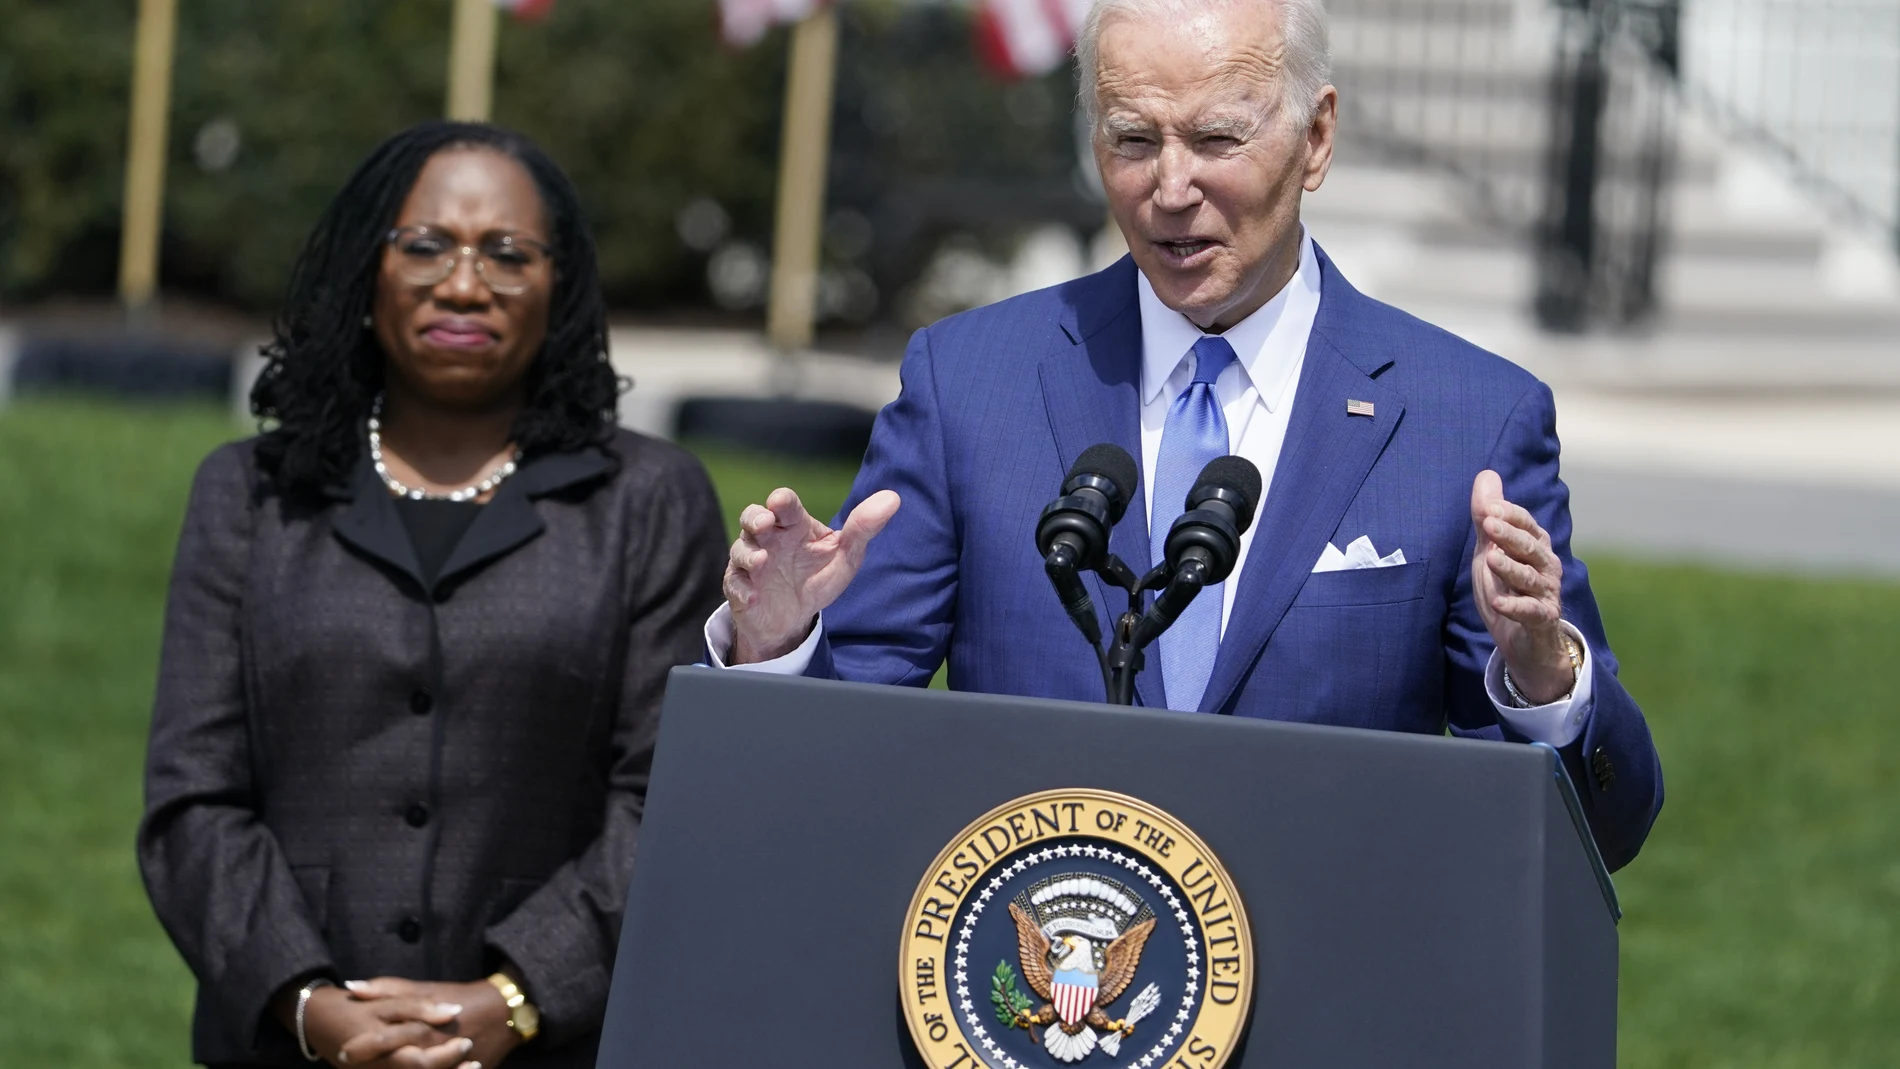 President Joe Biden, accompanied by Judge Ketanji Brown Jackson, speaks during an event on the South Lawn of the White House in Washington, Friday, April 8, 2022, celebrating the confirmation of Jackson as the first Black woman to reach the Supreme Court. (AP Photo/Andrew Harnik)